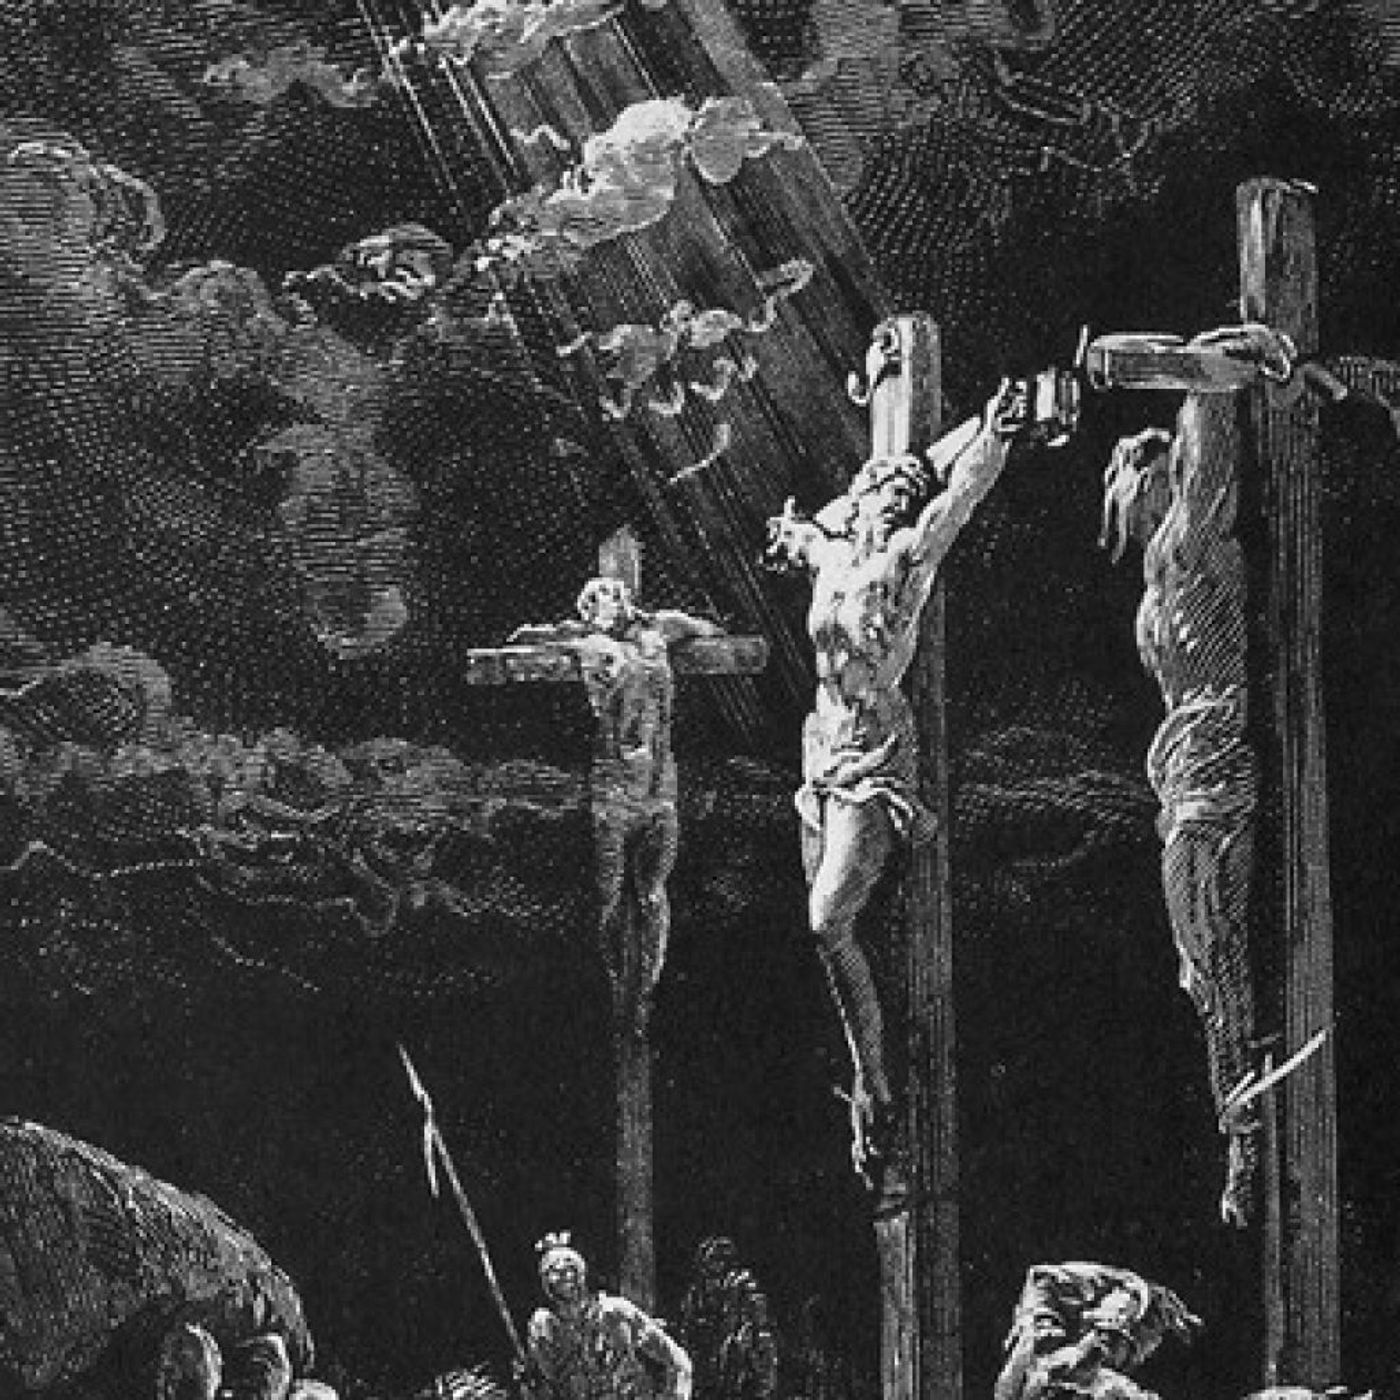 Good Friday: Humility Love and Suffering